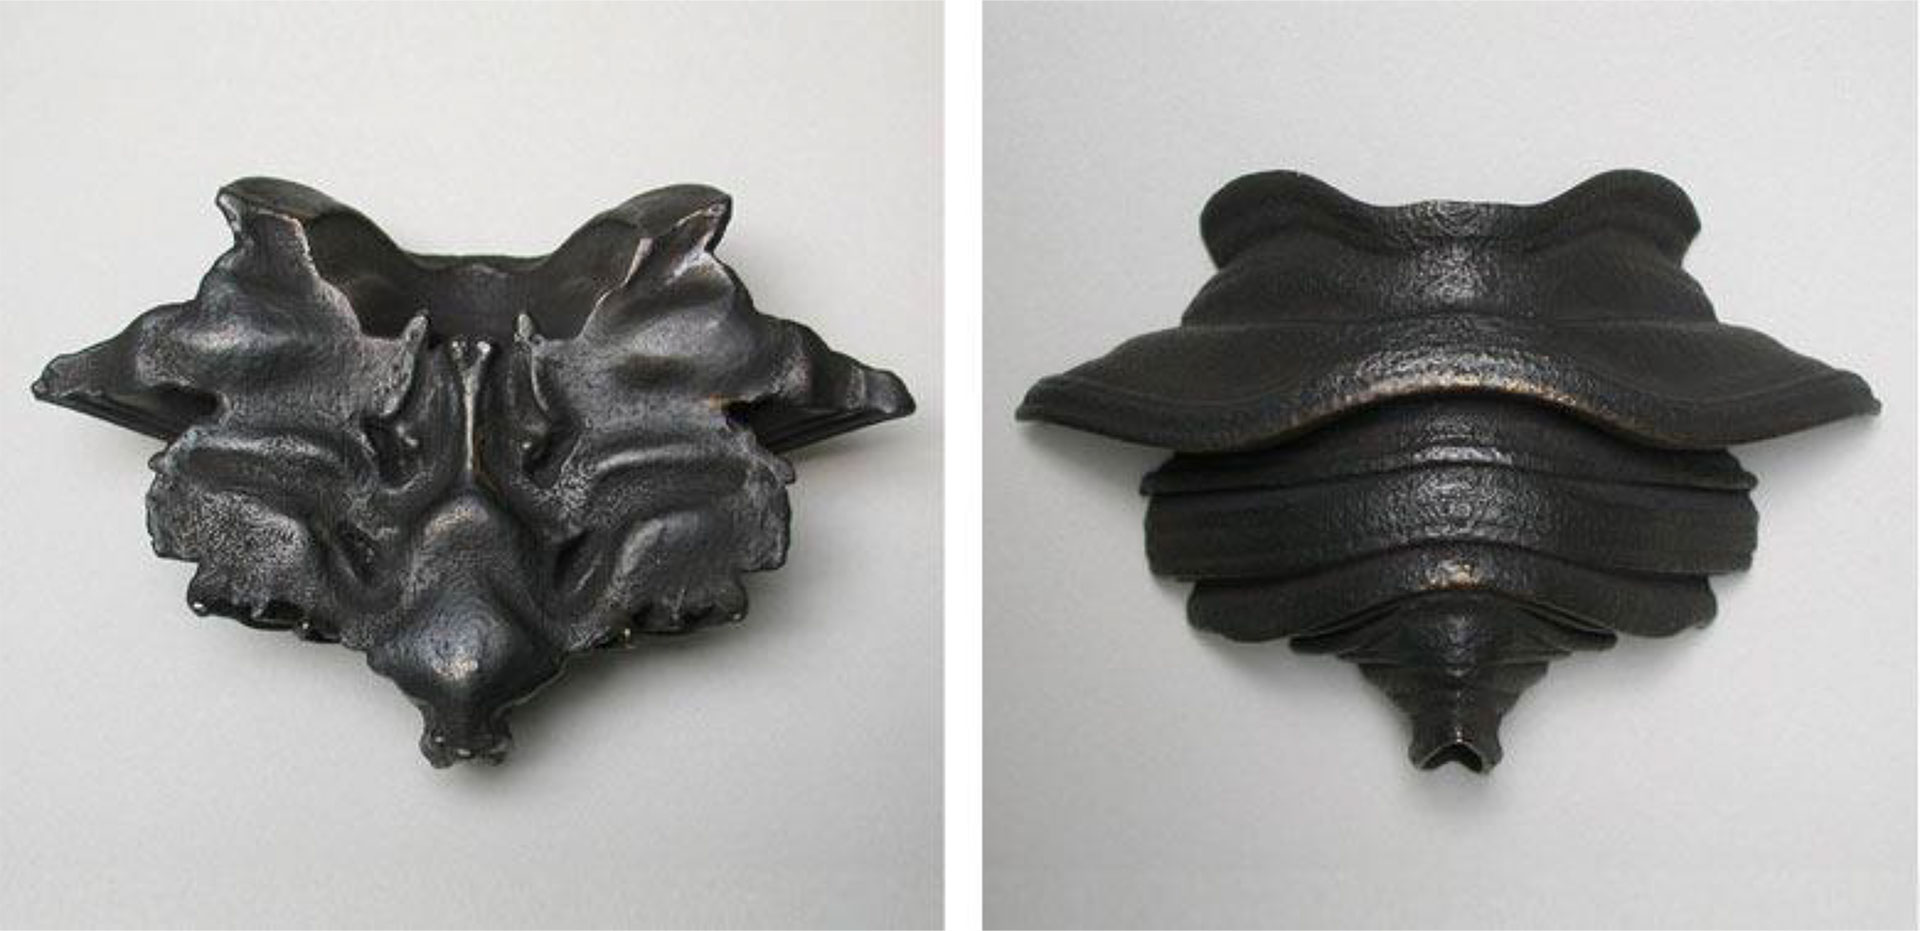 Suzanne Anker, Rorschach series (Wolf), 2004-05. Bronze, Edition of 3. 4.5” x 4” x 1”. $4,000. Also available in 4.5” x 5” x 1”. Plaster and resin; ivory white or painted black, Edition of 6. $500.